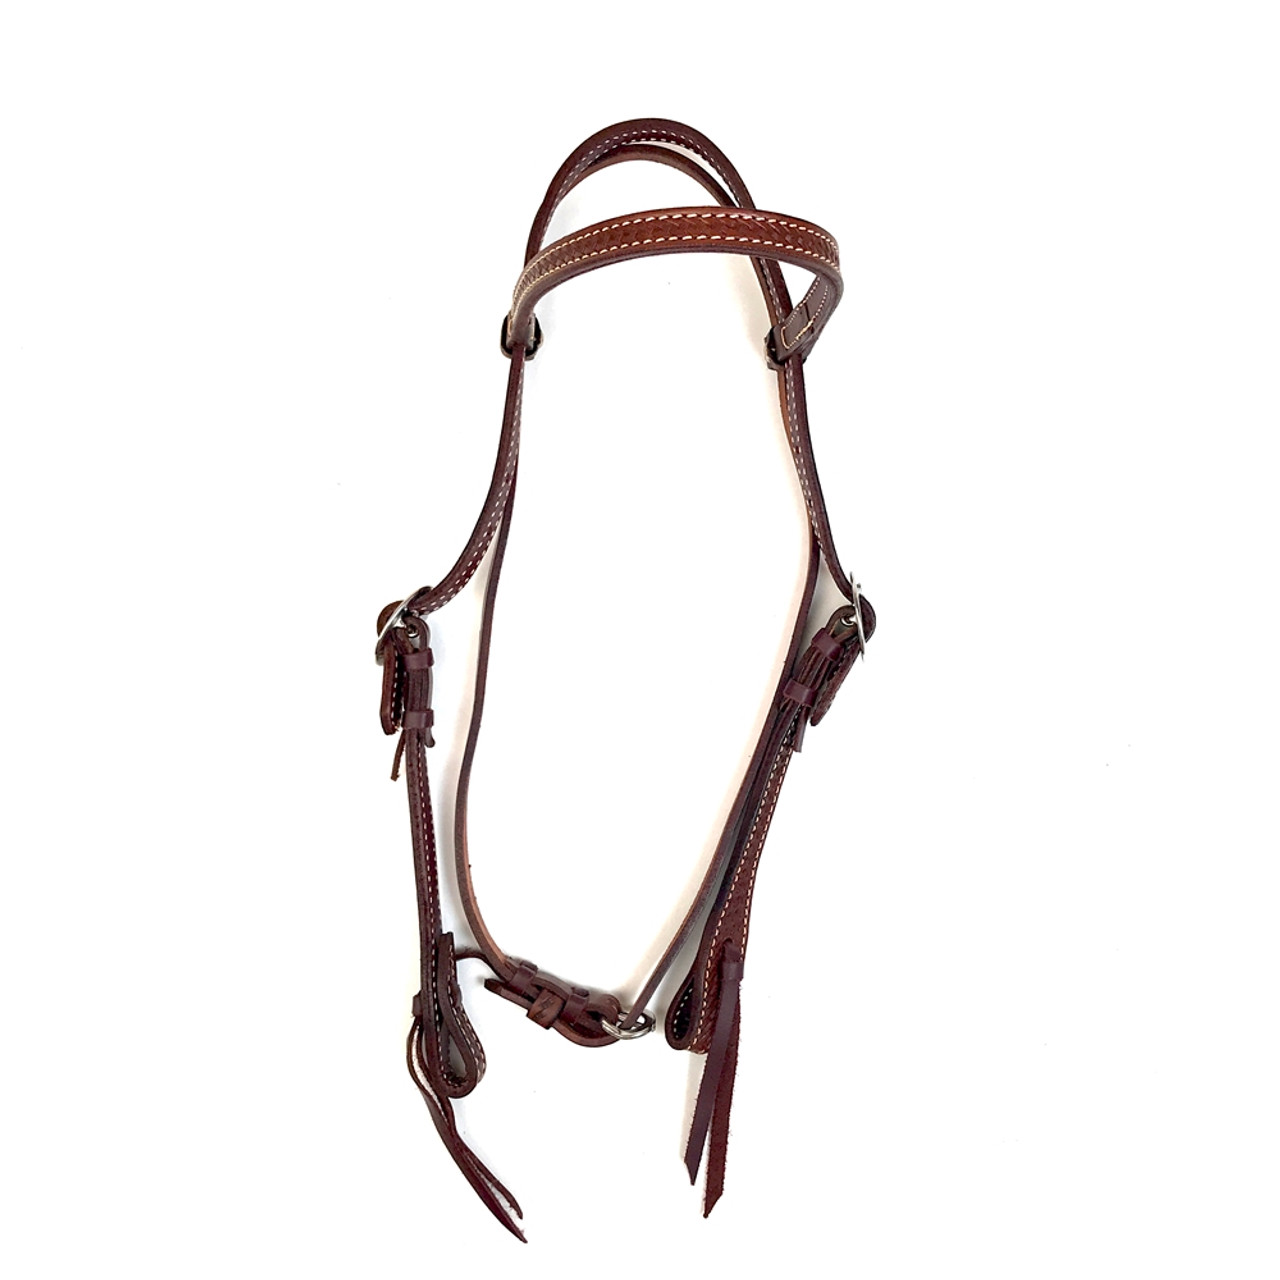 Wave-style Headstall, Roughout Leather (Caramel)